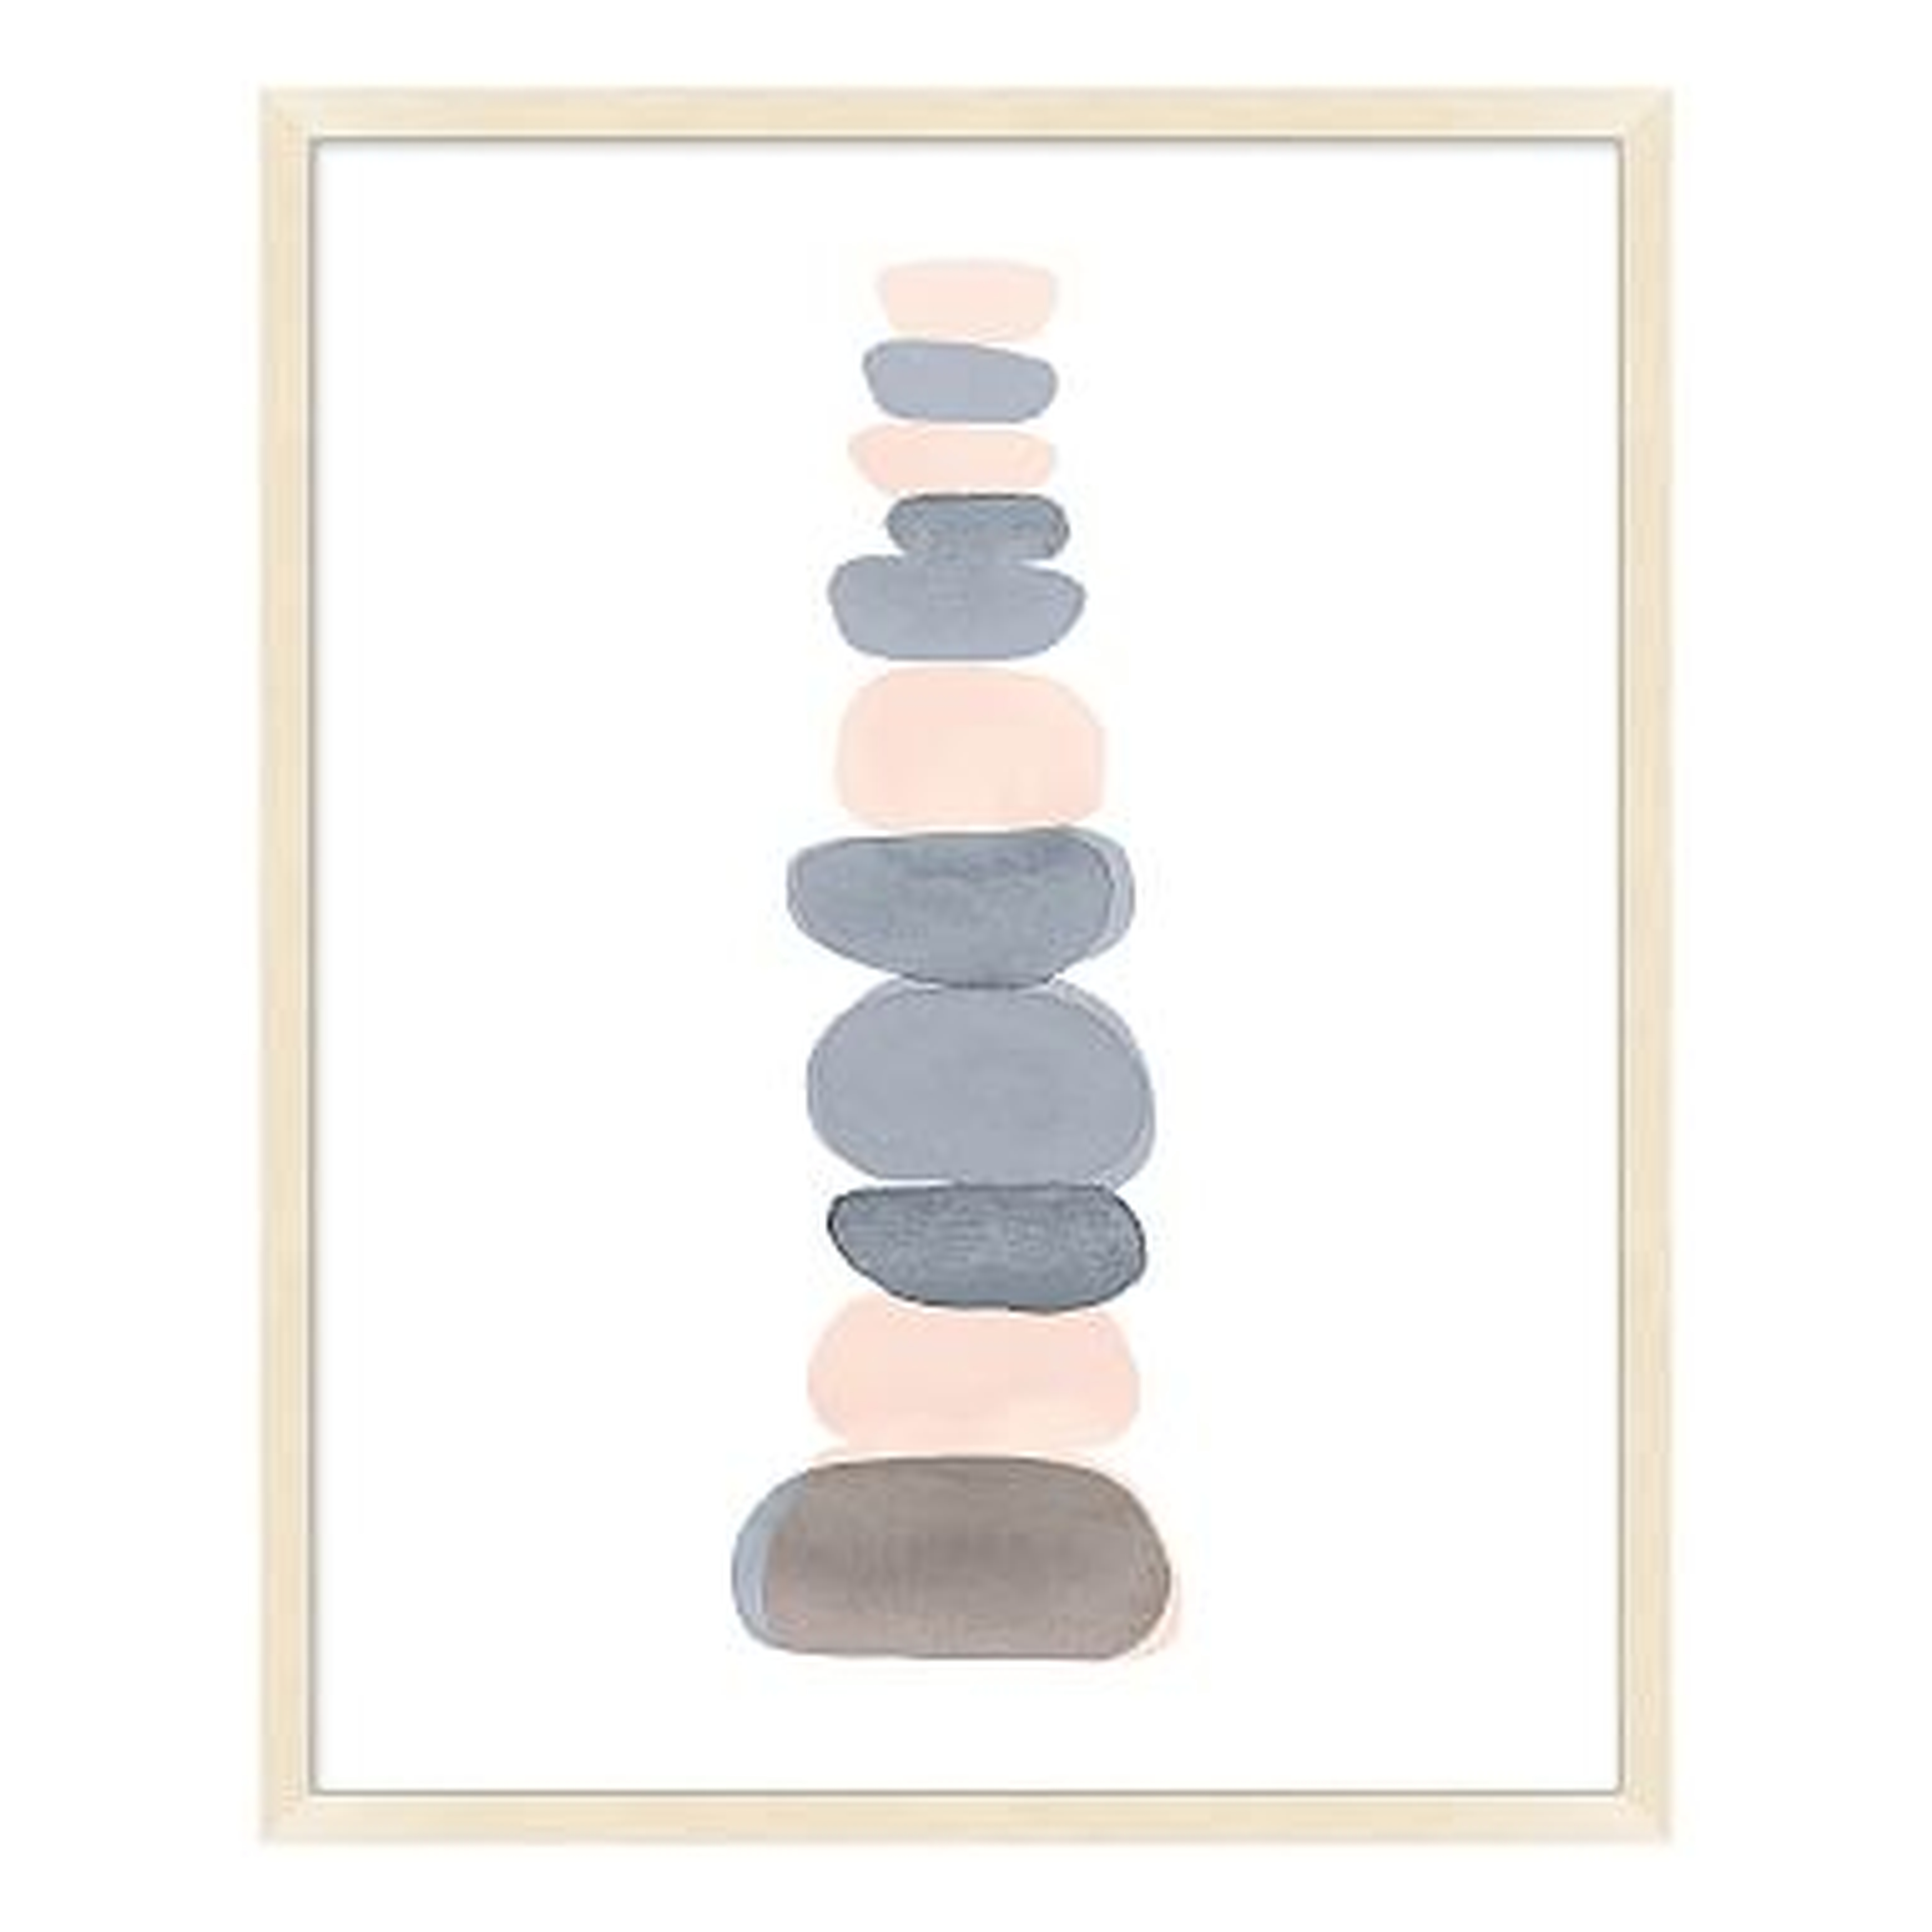 Blush and Gray Stacking Stones Framed Art, Natural Frame, 20"x25" - Pottery Barn Teen